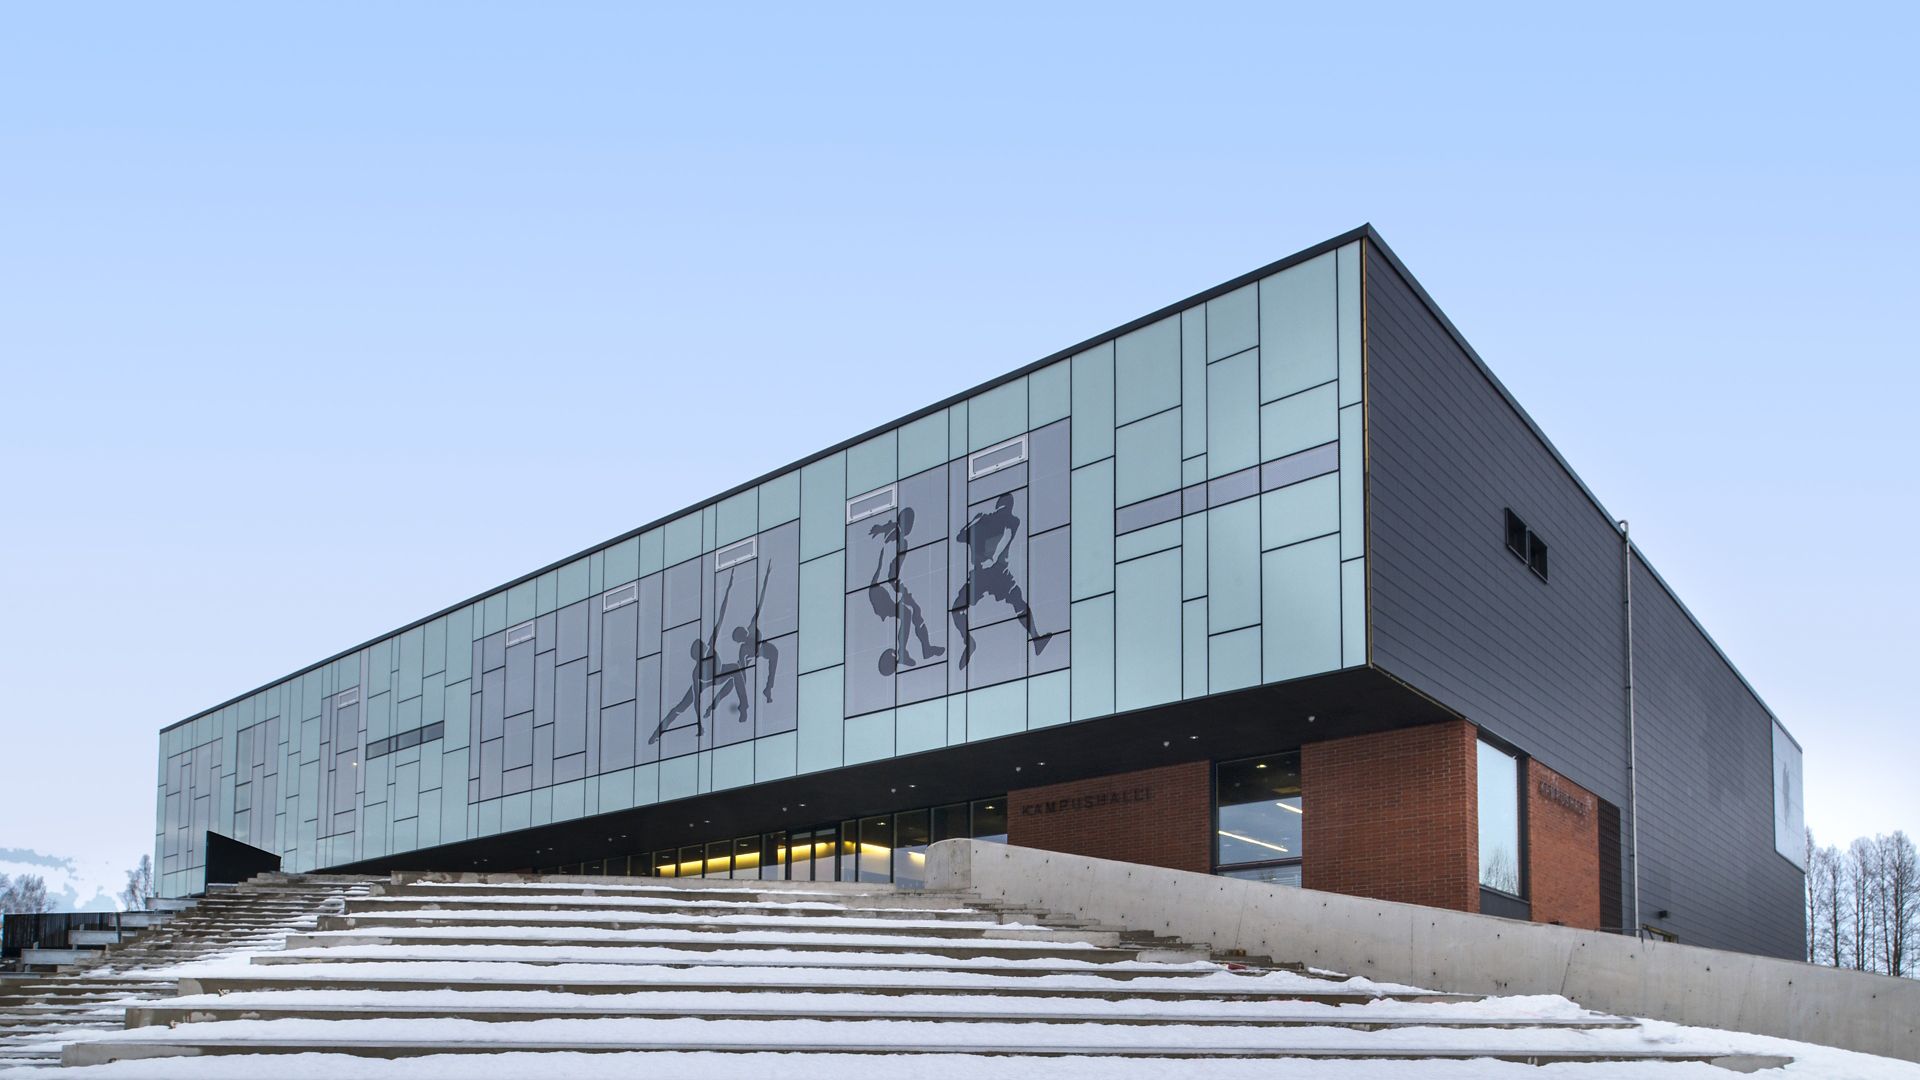 The building of Kokkola Campus in Finland